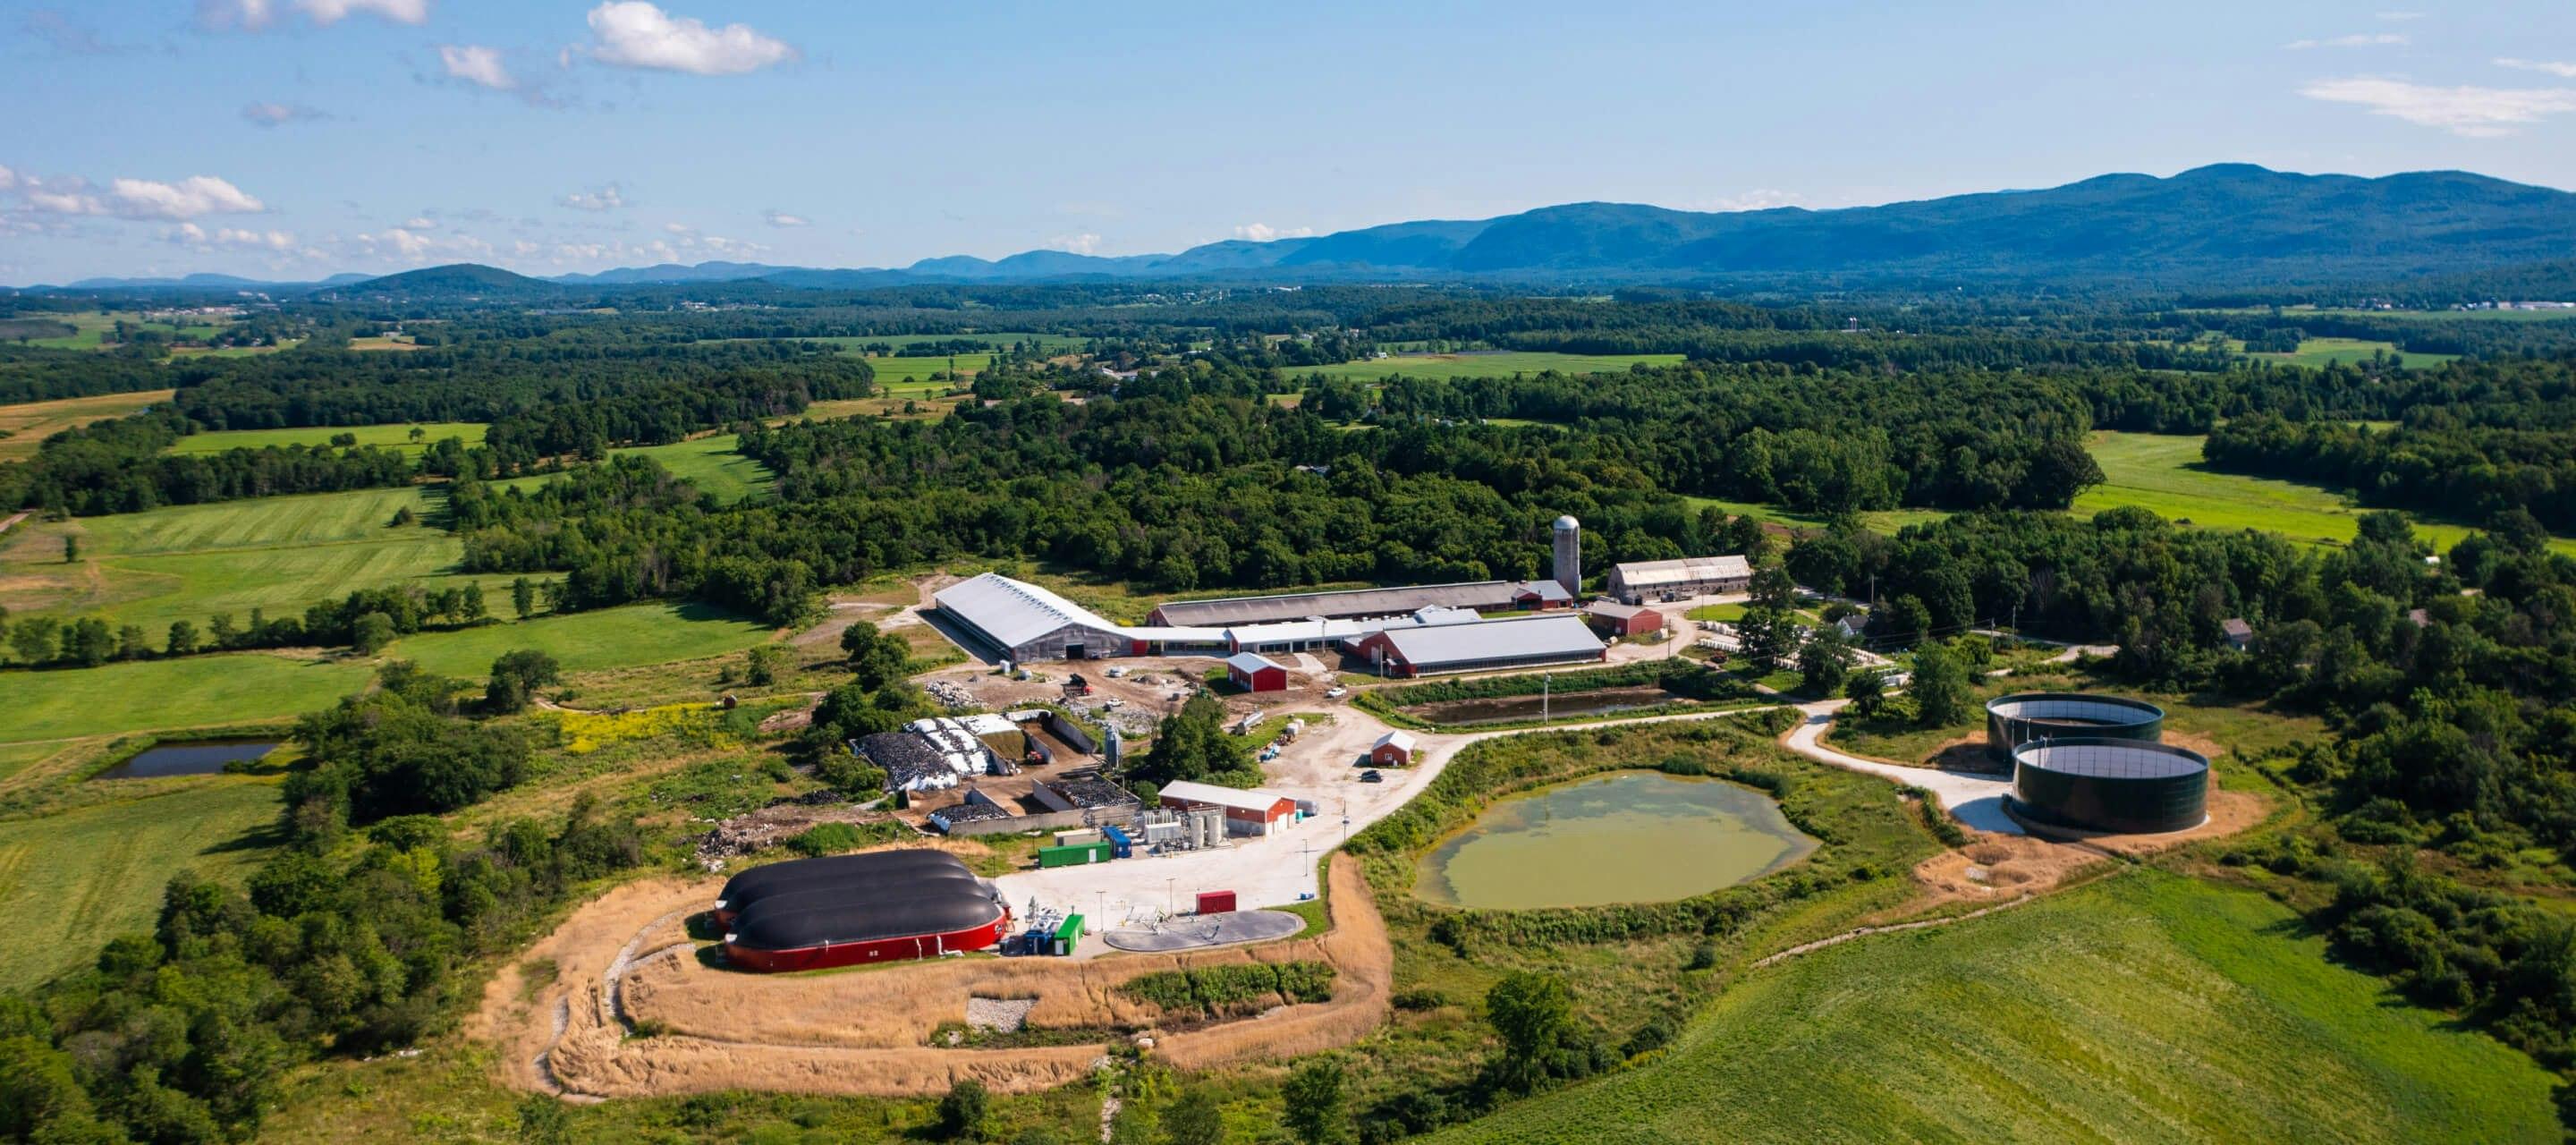 Anaerobic digestion facility on a farm, generating renewable energy from food waste recycling